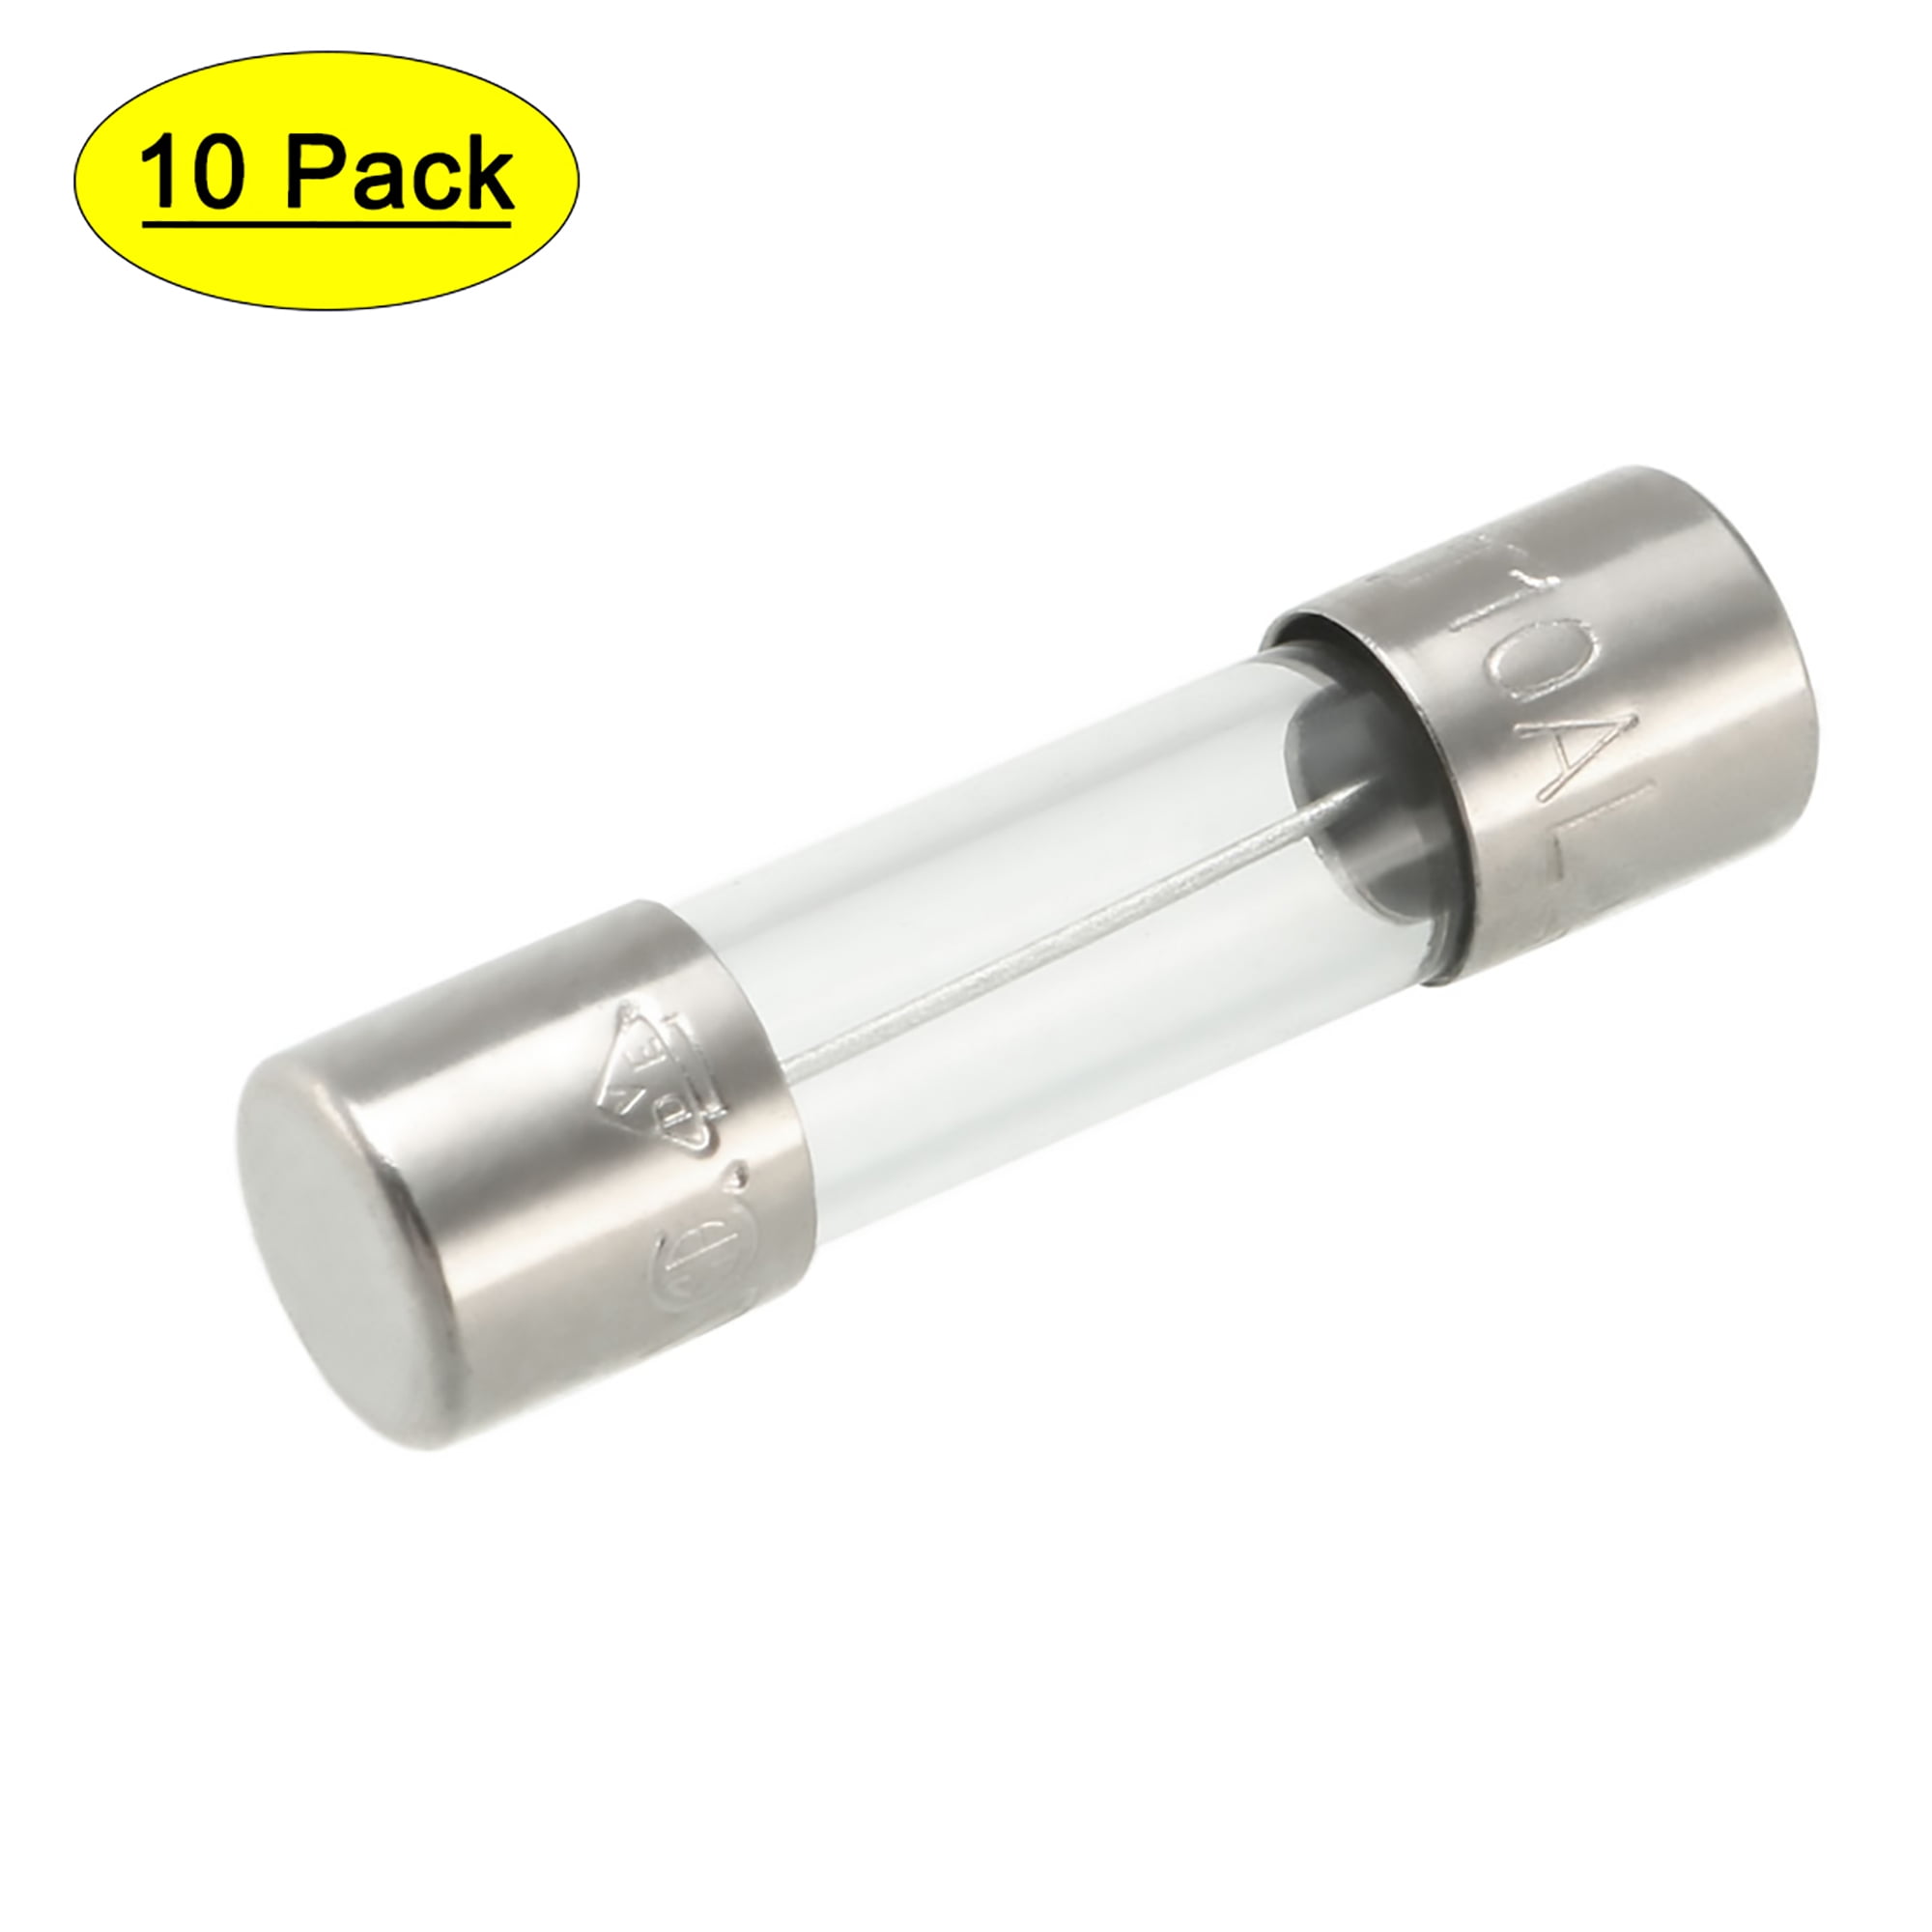 Pack of 5, T3.15A250V, T3.15A 250V, T3.15 250V Axial, Ceramic Fuses 1/8  inch X 3/8 inch (3.6X10mm), 3.15Amp (3.15A) 250V, Slow Blow (Time Delay):  Cartridge Fuses: : Tools & Home Improvement